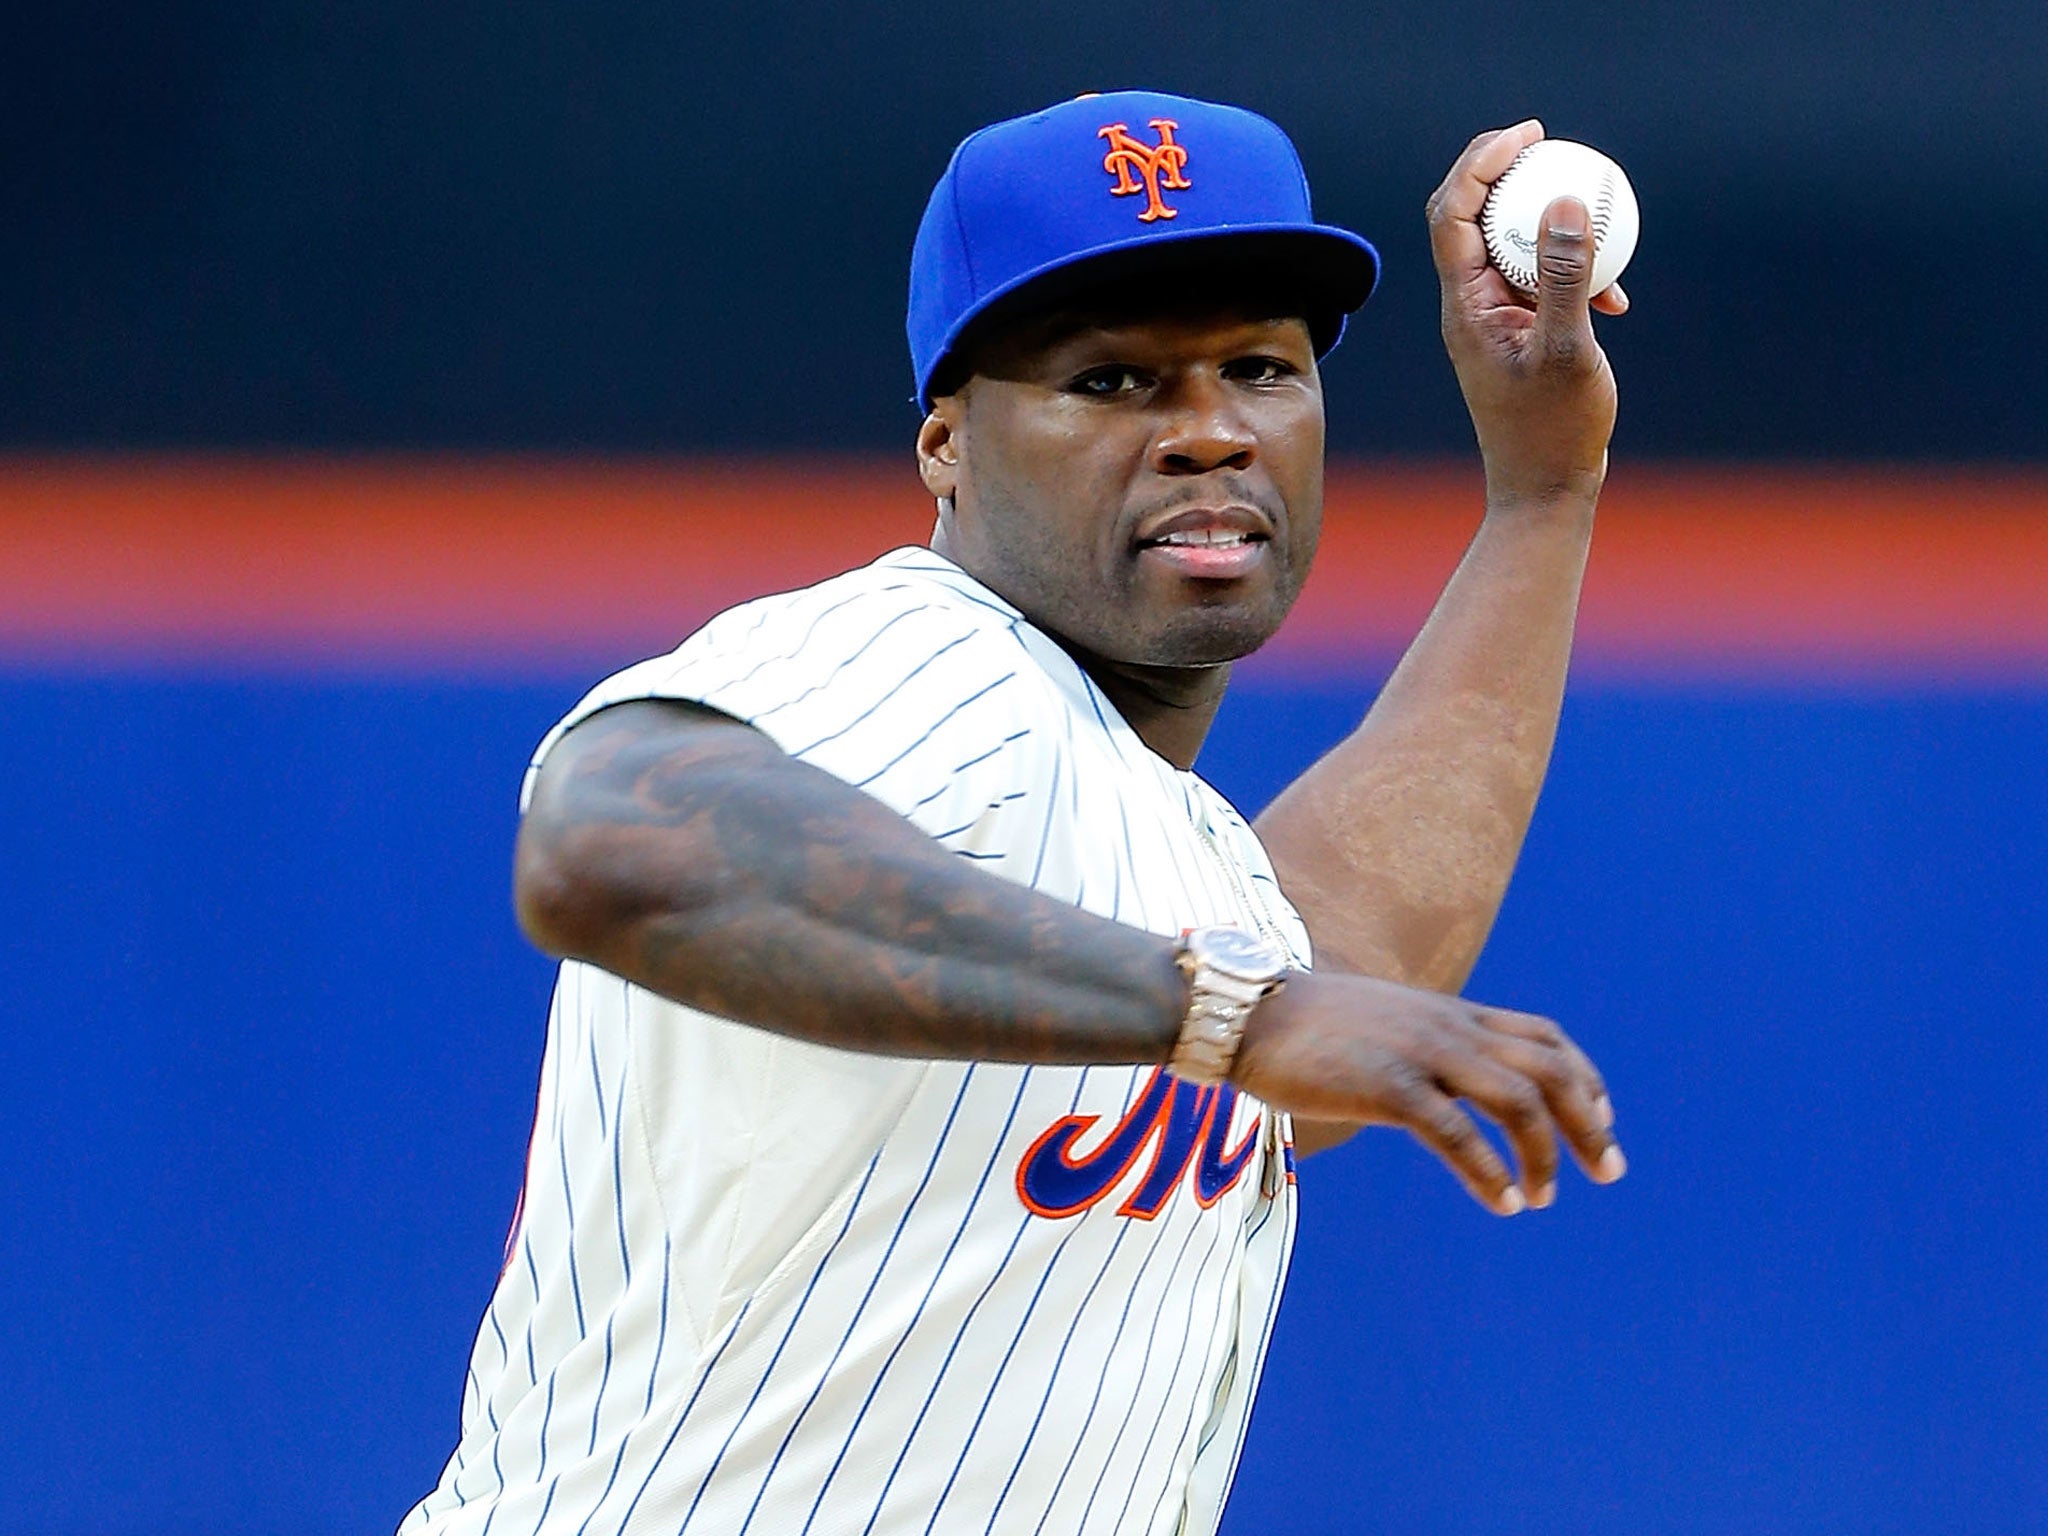 50 Cent throws the first pitch ahead of New York Mets v Pittsburgh Pirates game